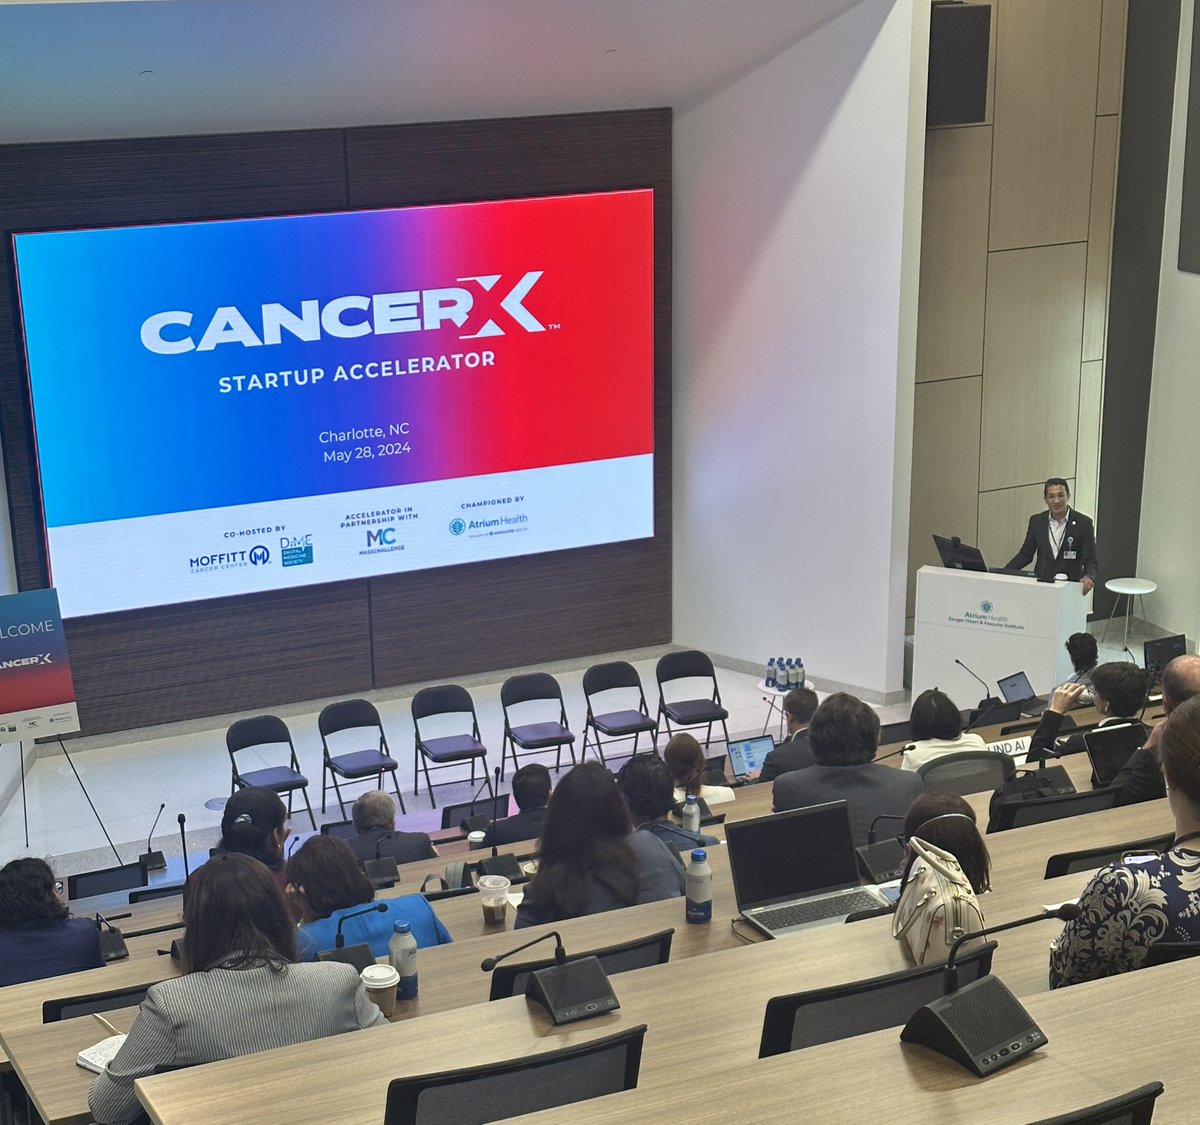 In the year 2030, what would we have regretted not starting today? That question posed by @RasuShrestha as he kicks off the @CancerXMoonshot Accelerator Startup event at @AtriumHealth bringing together oncology, technology & innovation to reduce the burden of cancer #ForAll